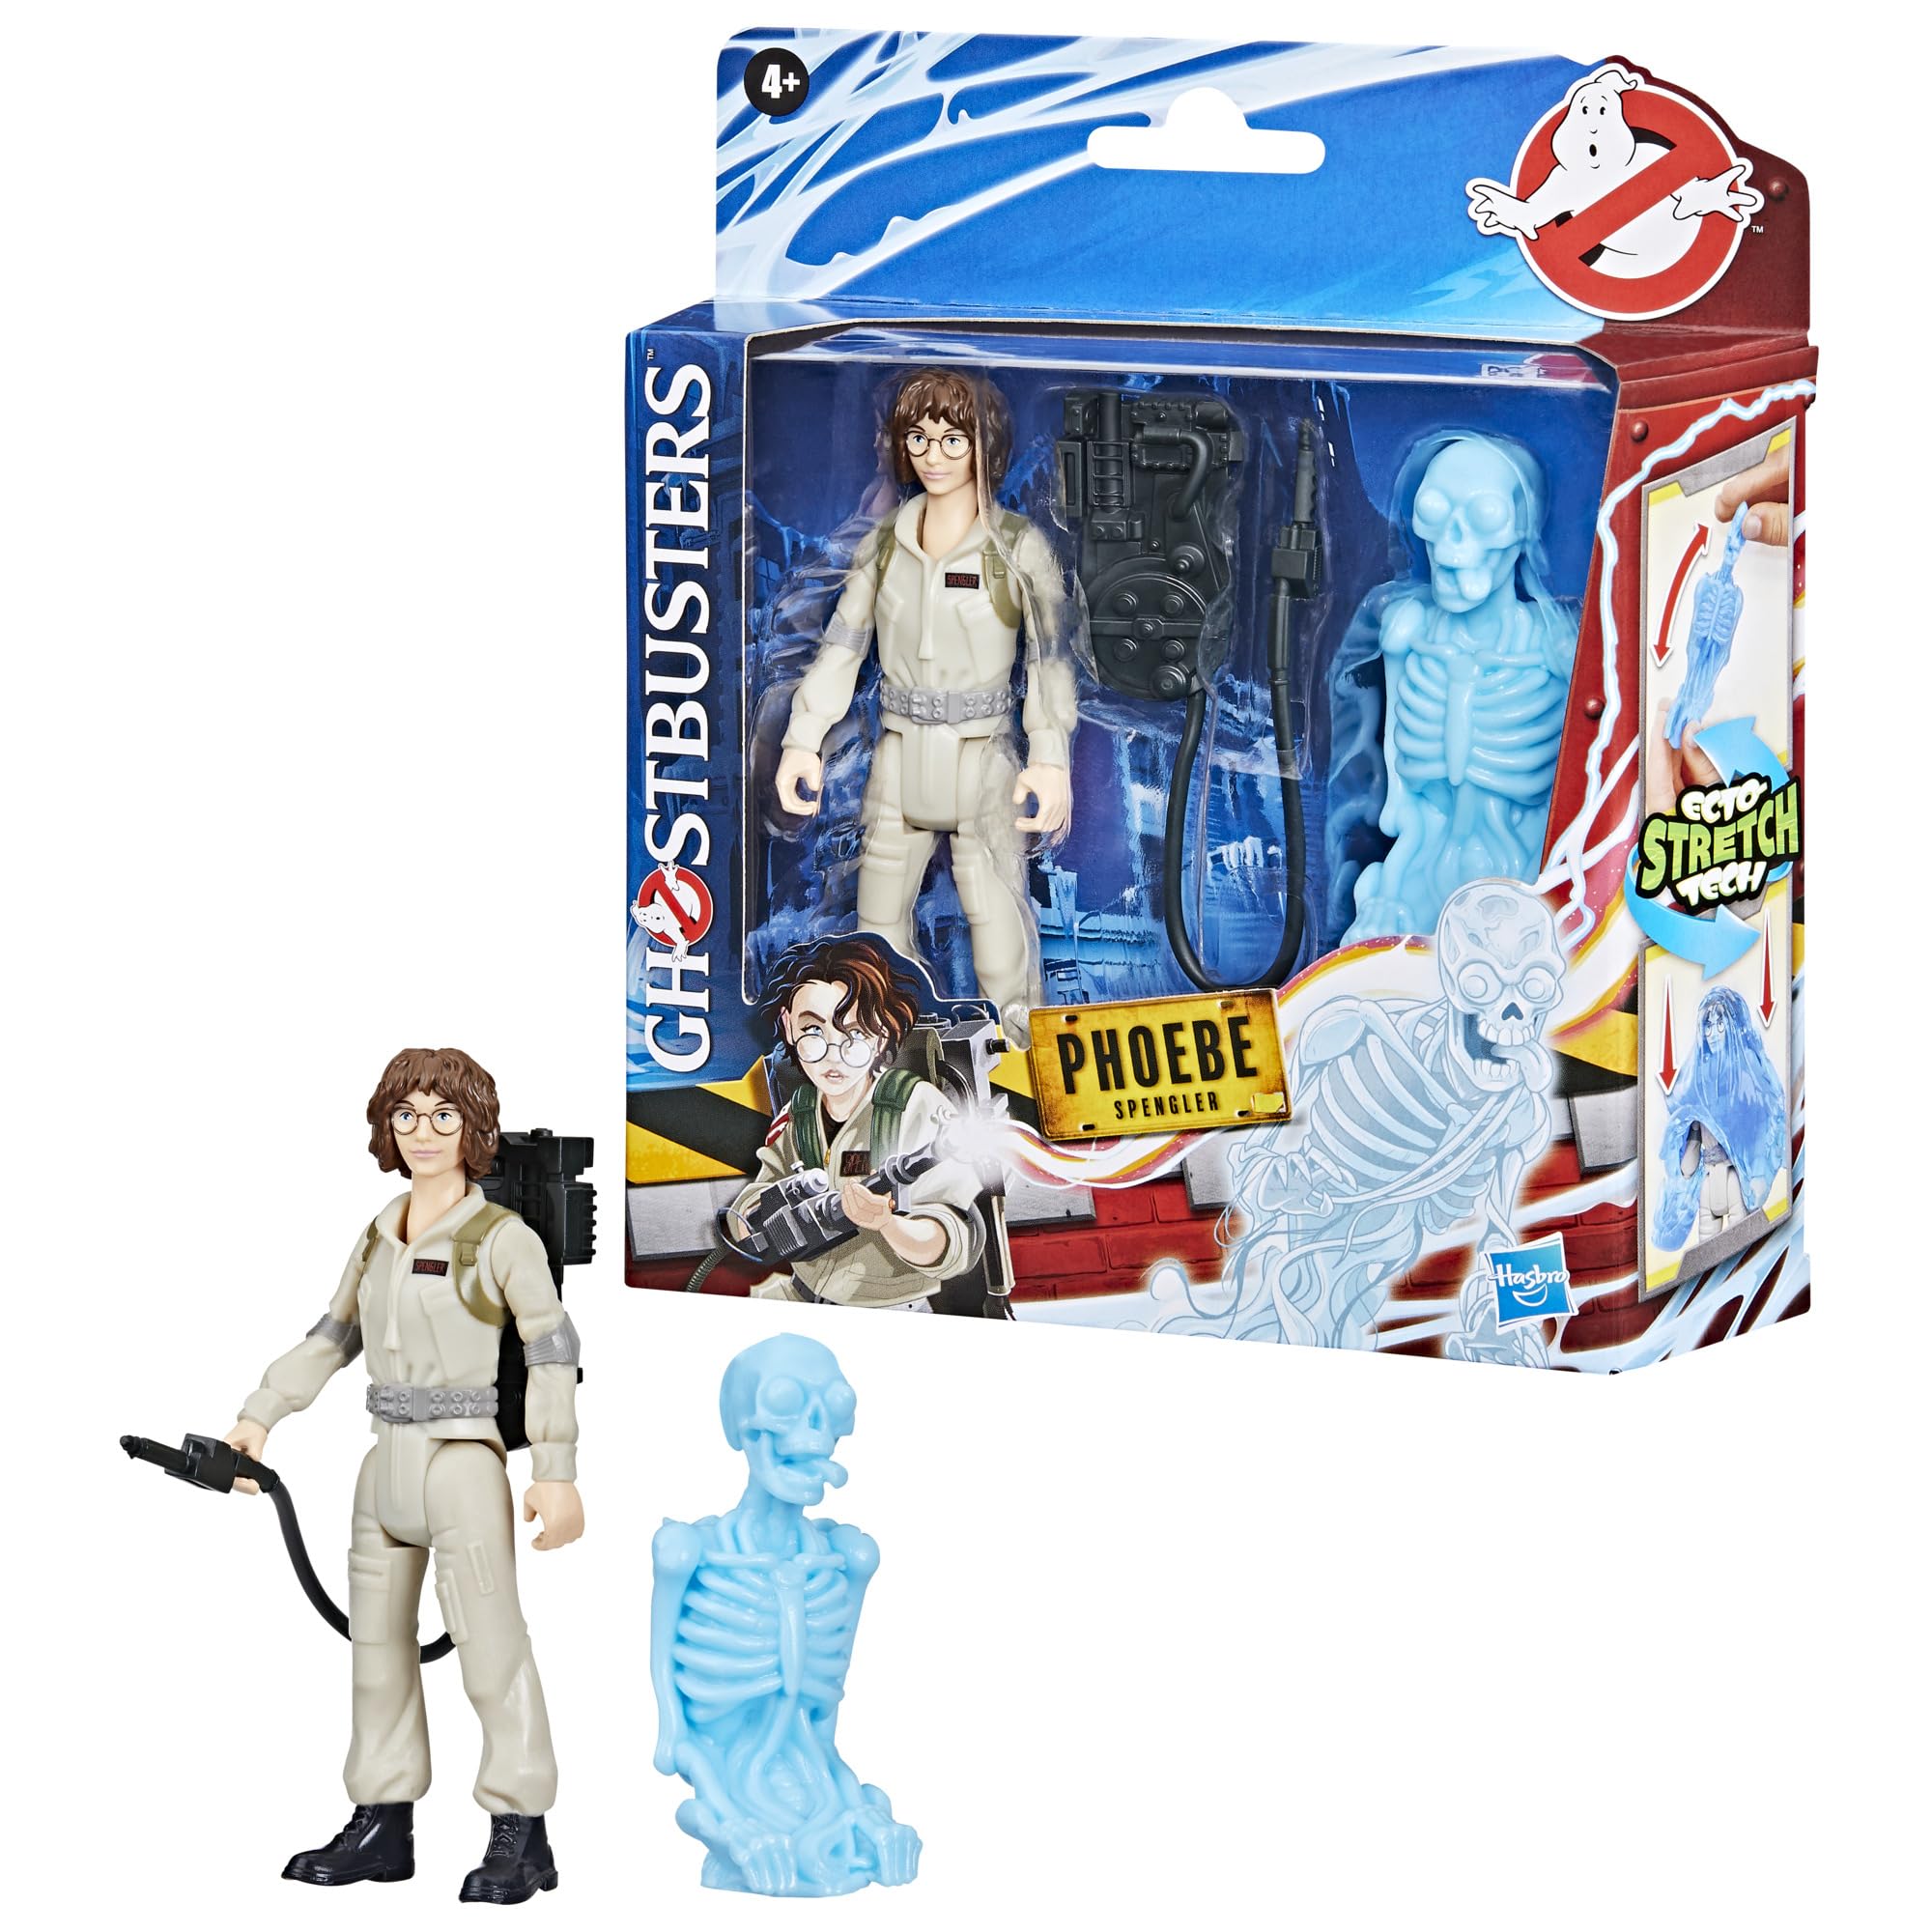 GHOSTBUSTERS Fright Features Phoebe Spengler Action Figure with Ecto-Stretch Tech Bonesy Ghost Toy Accessory, Toys for Kids Ages 4+